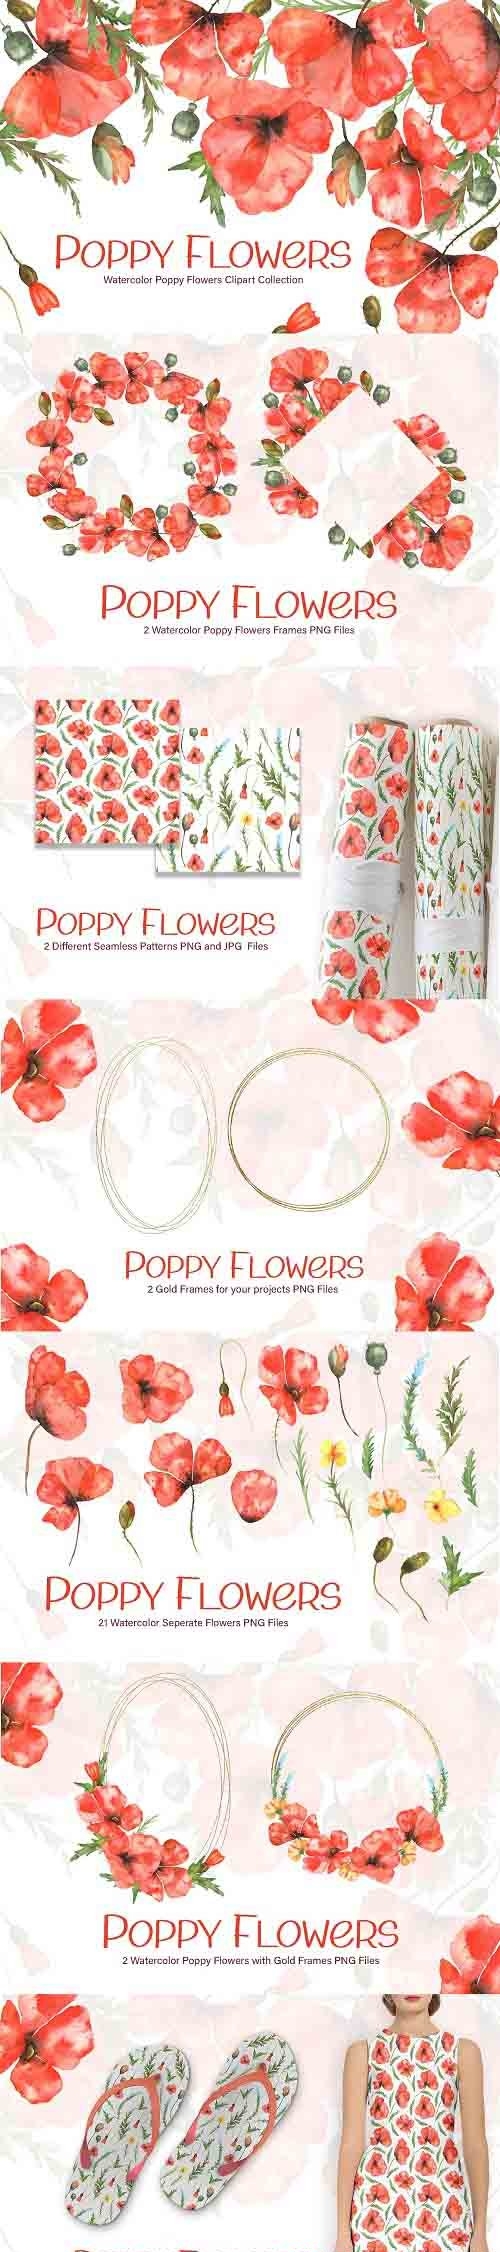 Watercolor Poppy Flowers Collection - 5988143